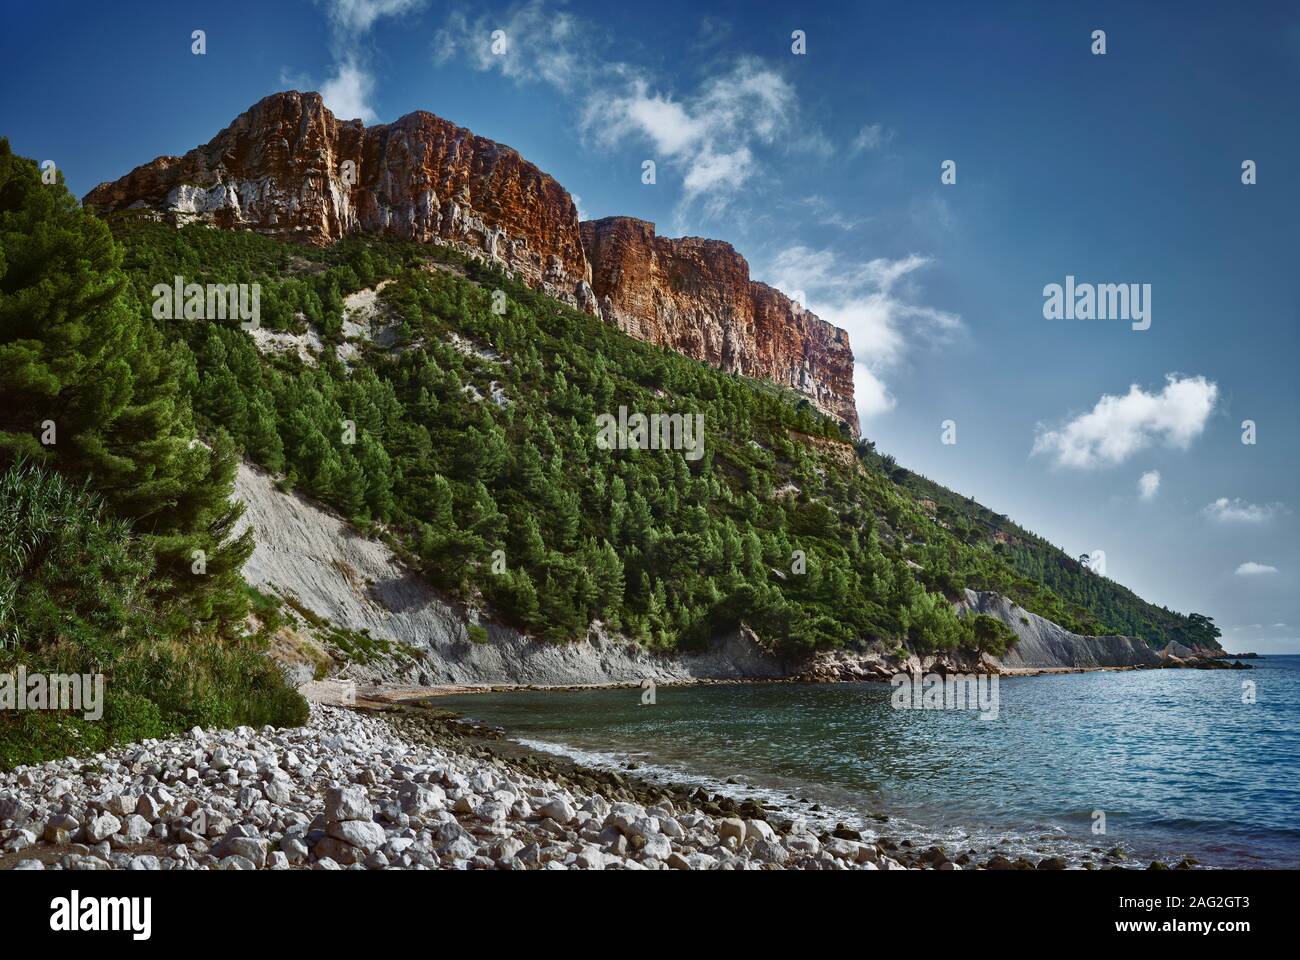 Cliffs of Cap Canaille in Cassis port town, landscape nature scenery, Southern France, the Mediterranean Sea coast. Cassis travel photography. Stock Photo